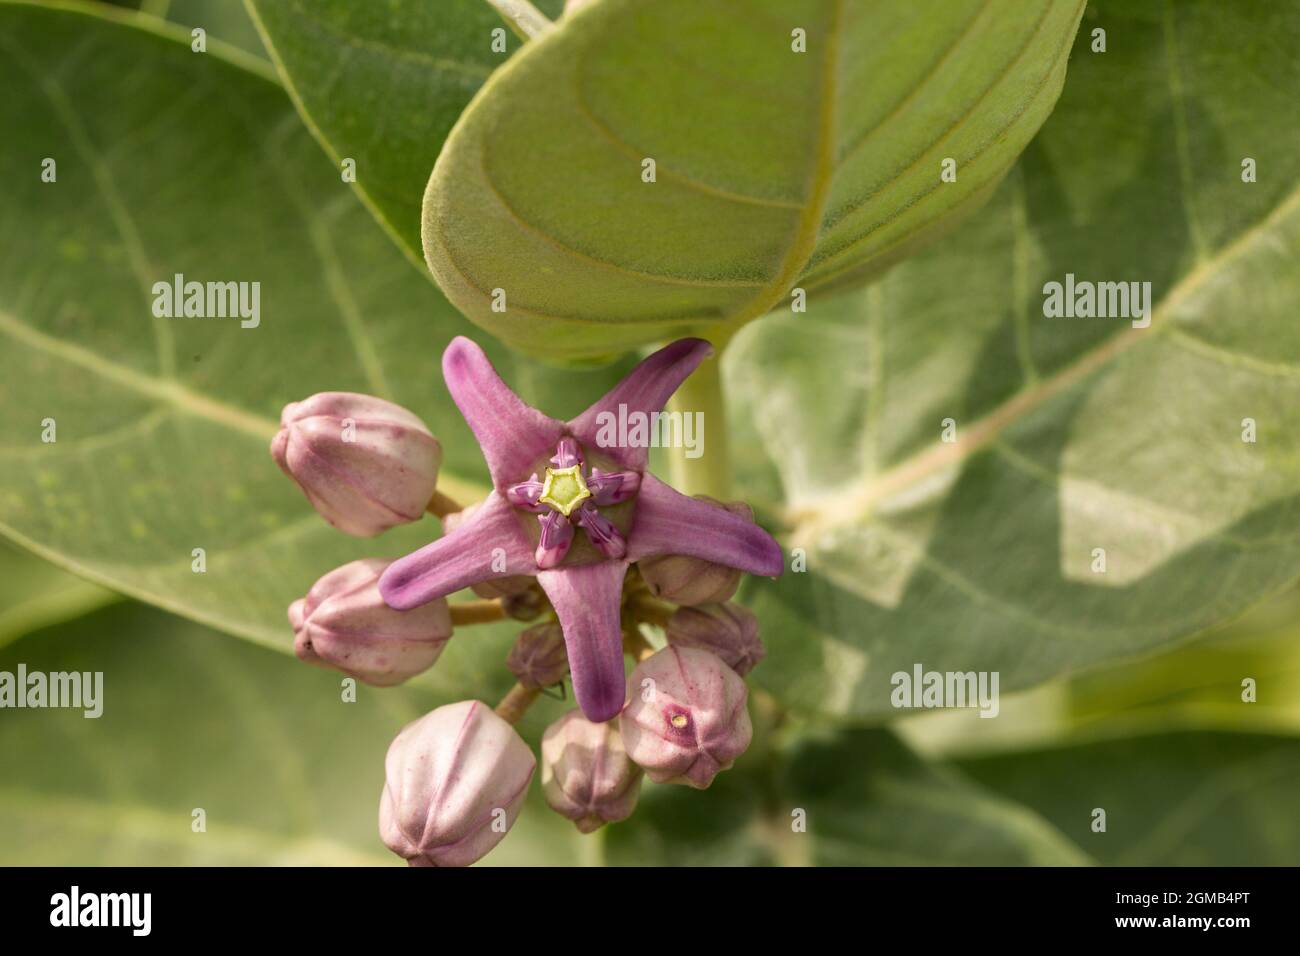 The green leaves and purple flowers of the crown flower. Stock Photo